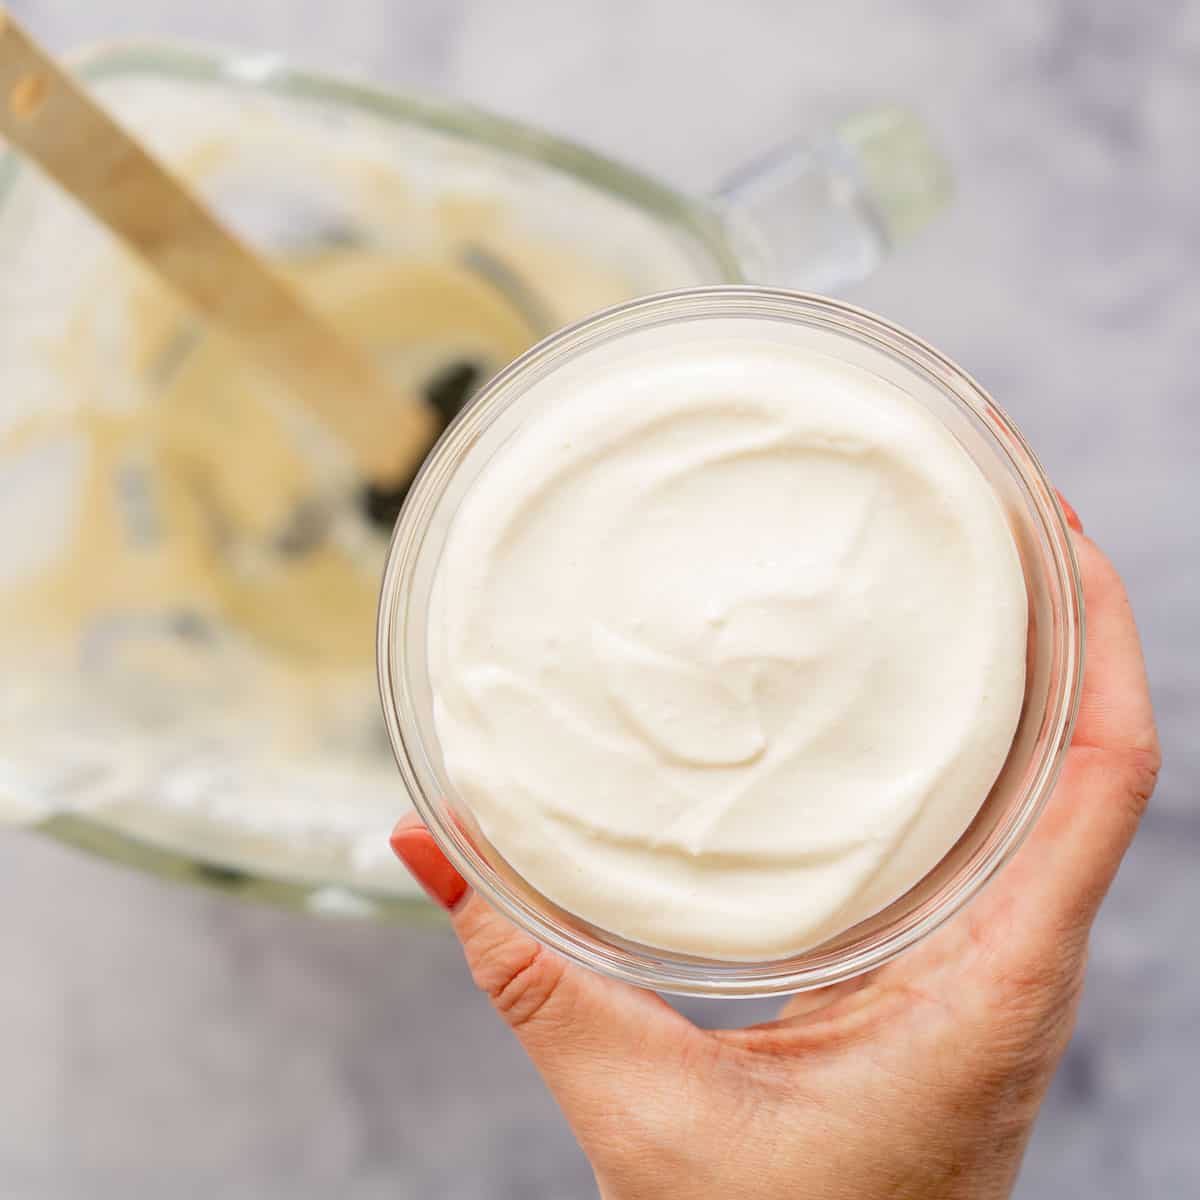 A hand holding up a glass bowl of Whipped Cottage Cheese dip above the blender